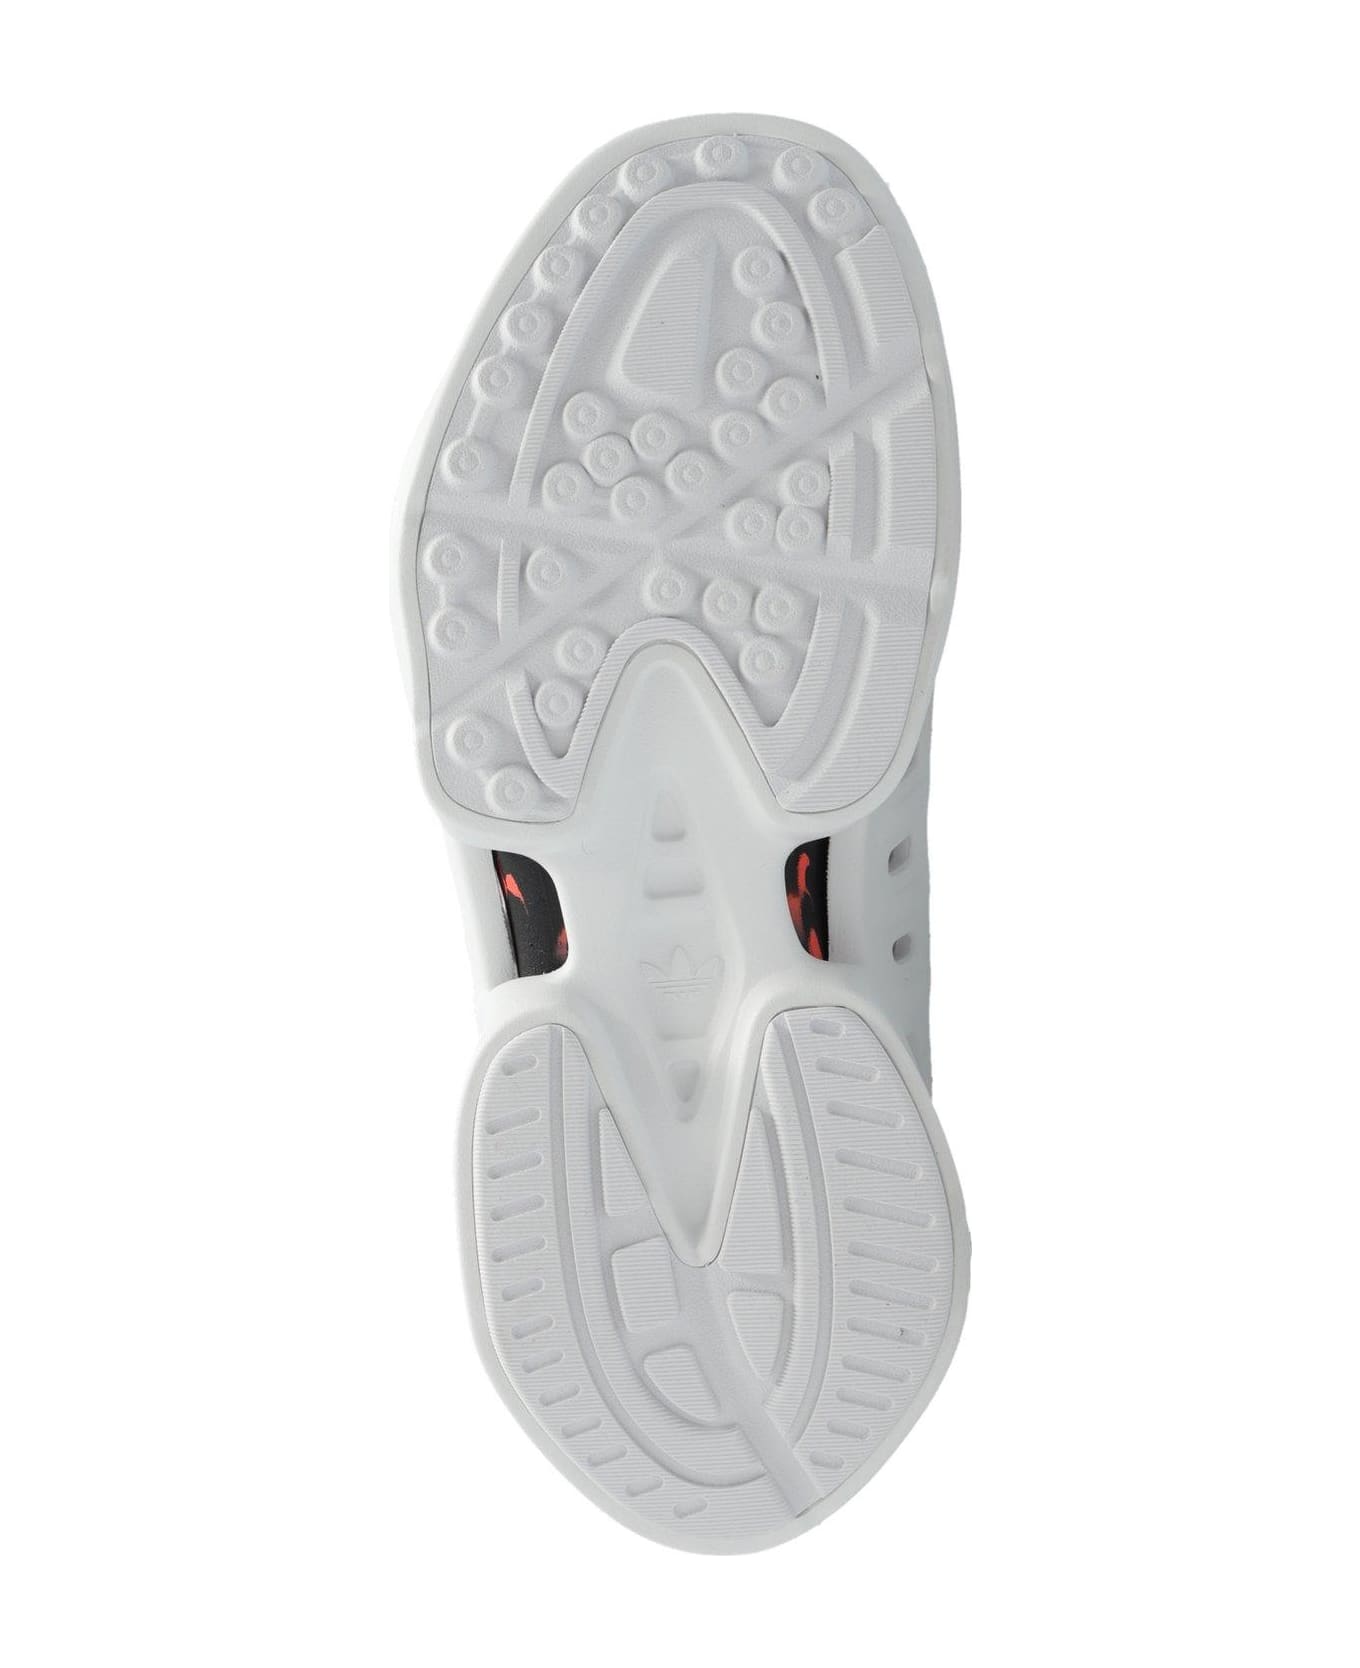 Adidas Originals Adifom Climacool Cut-out Lace-up Sneakers - White スニーカー